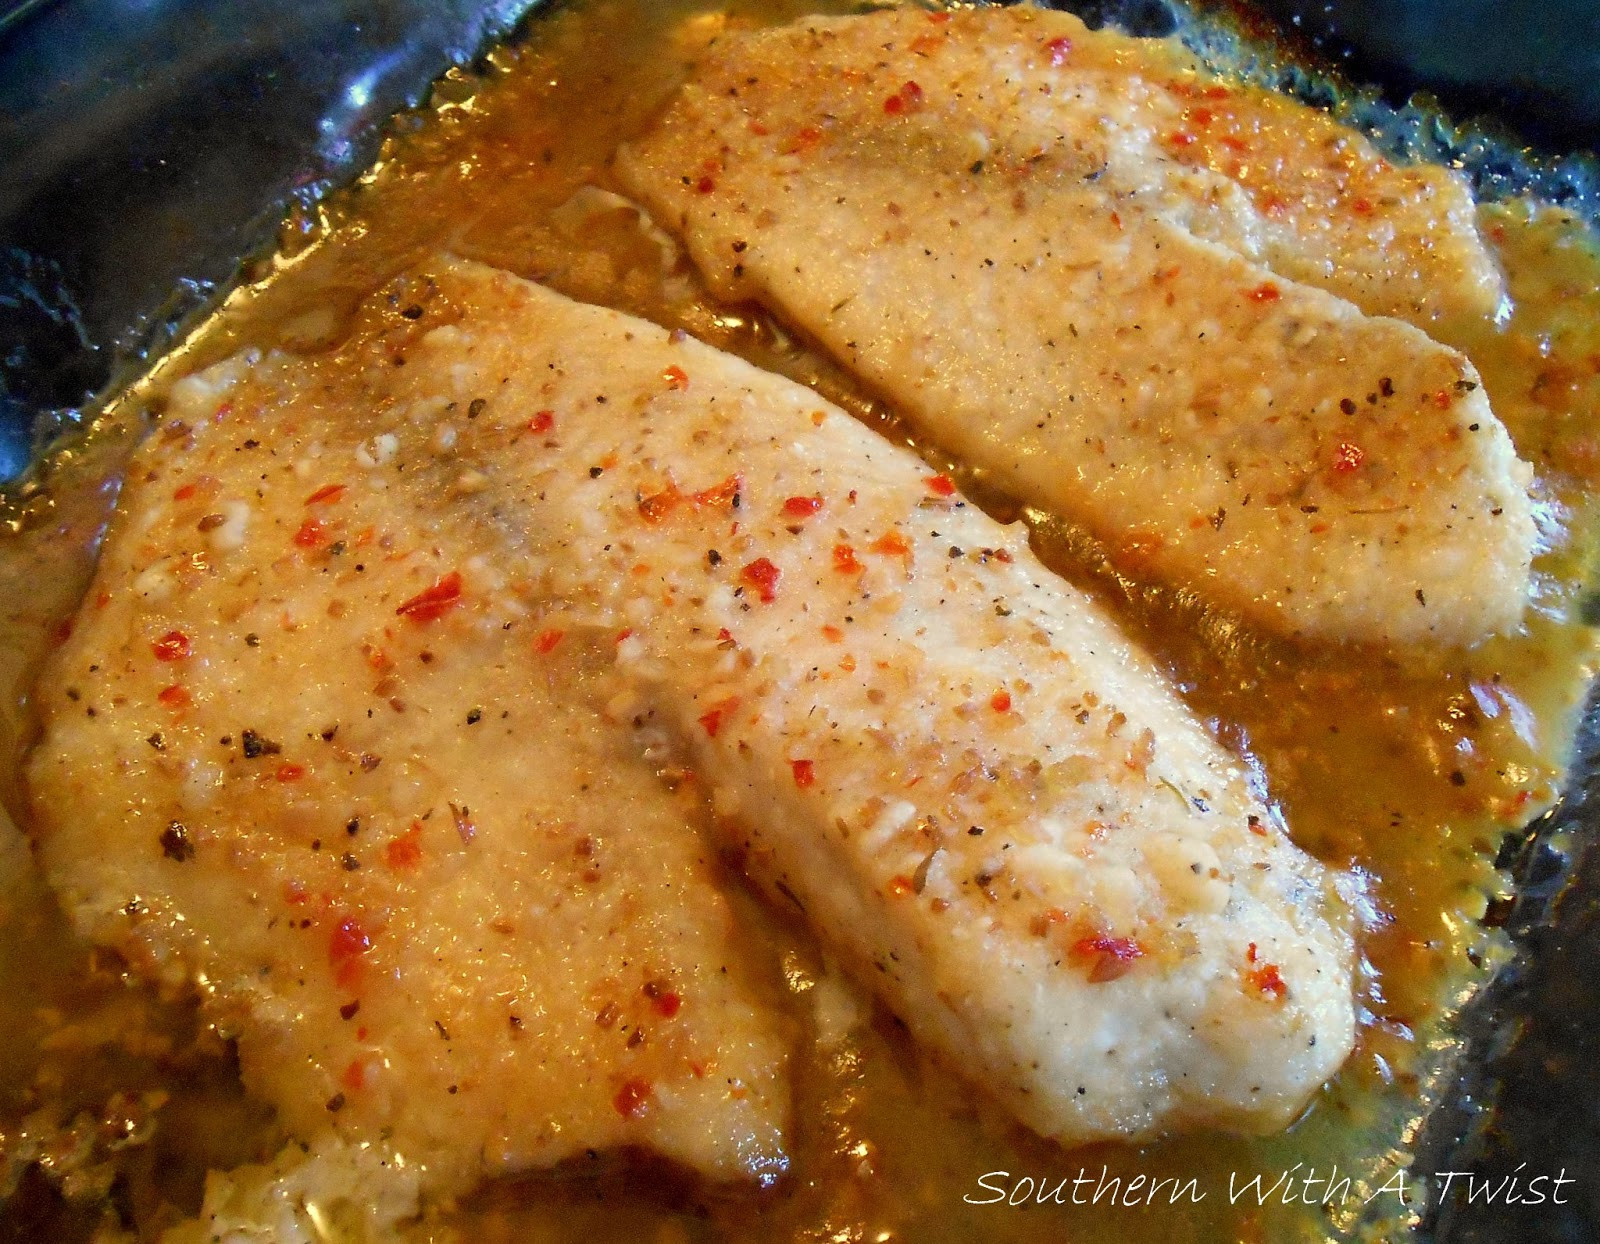 Recipes For Baking Fish Fillets
 Southern With A Twist Baked Fish